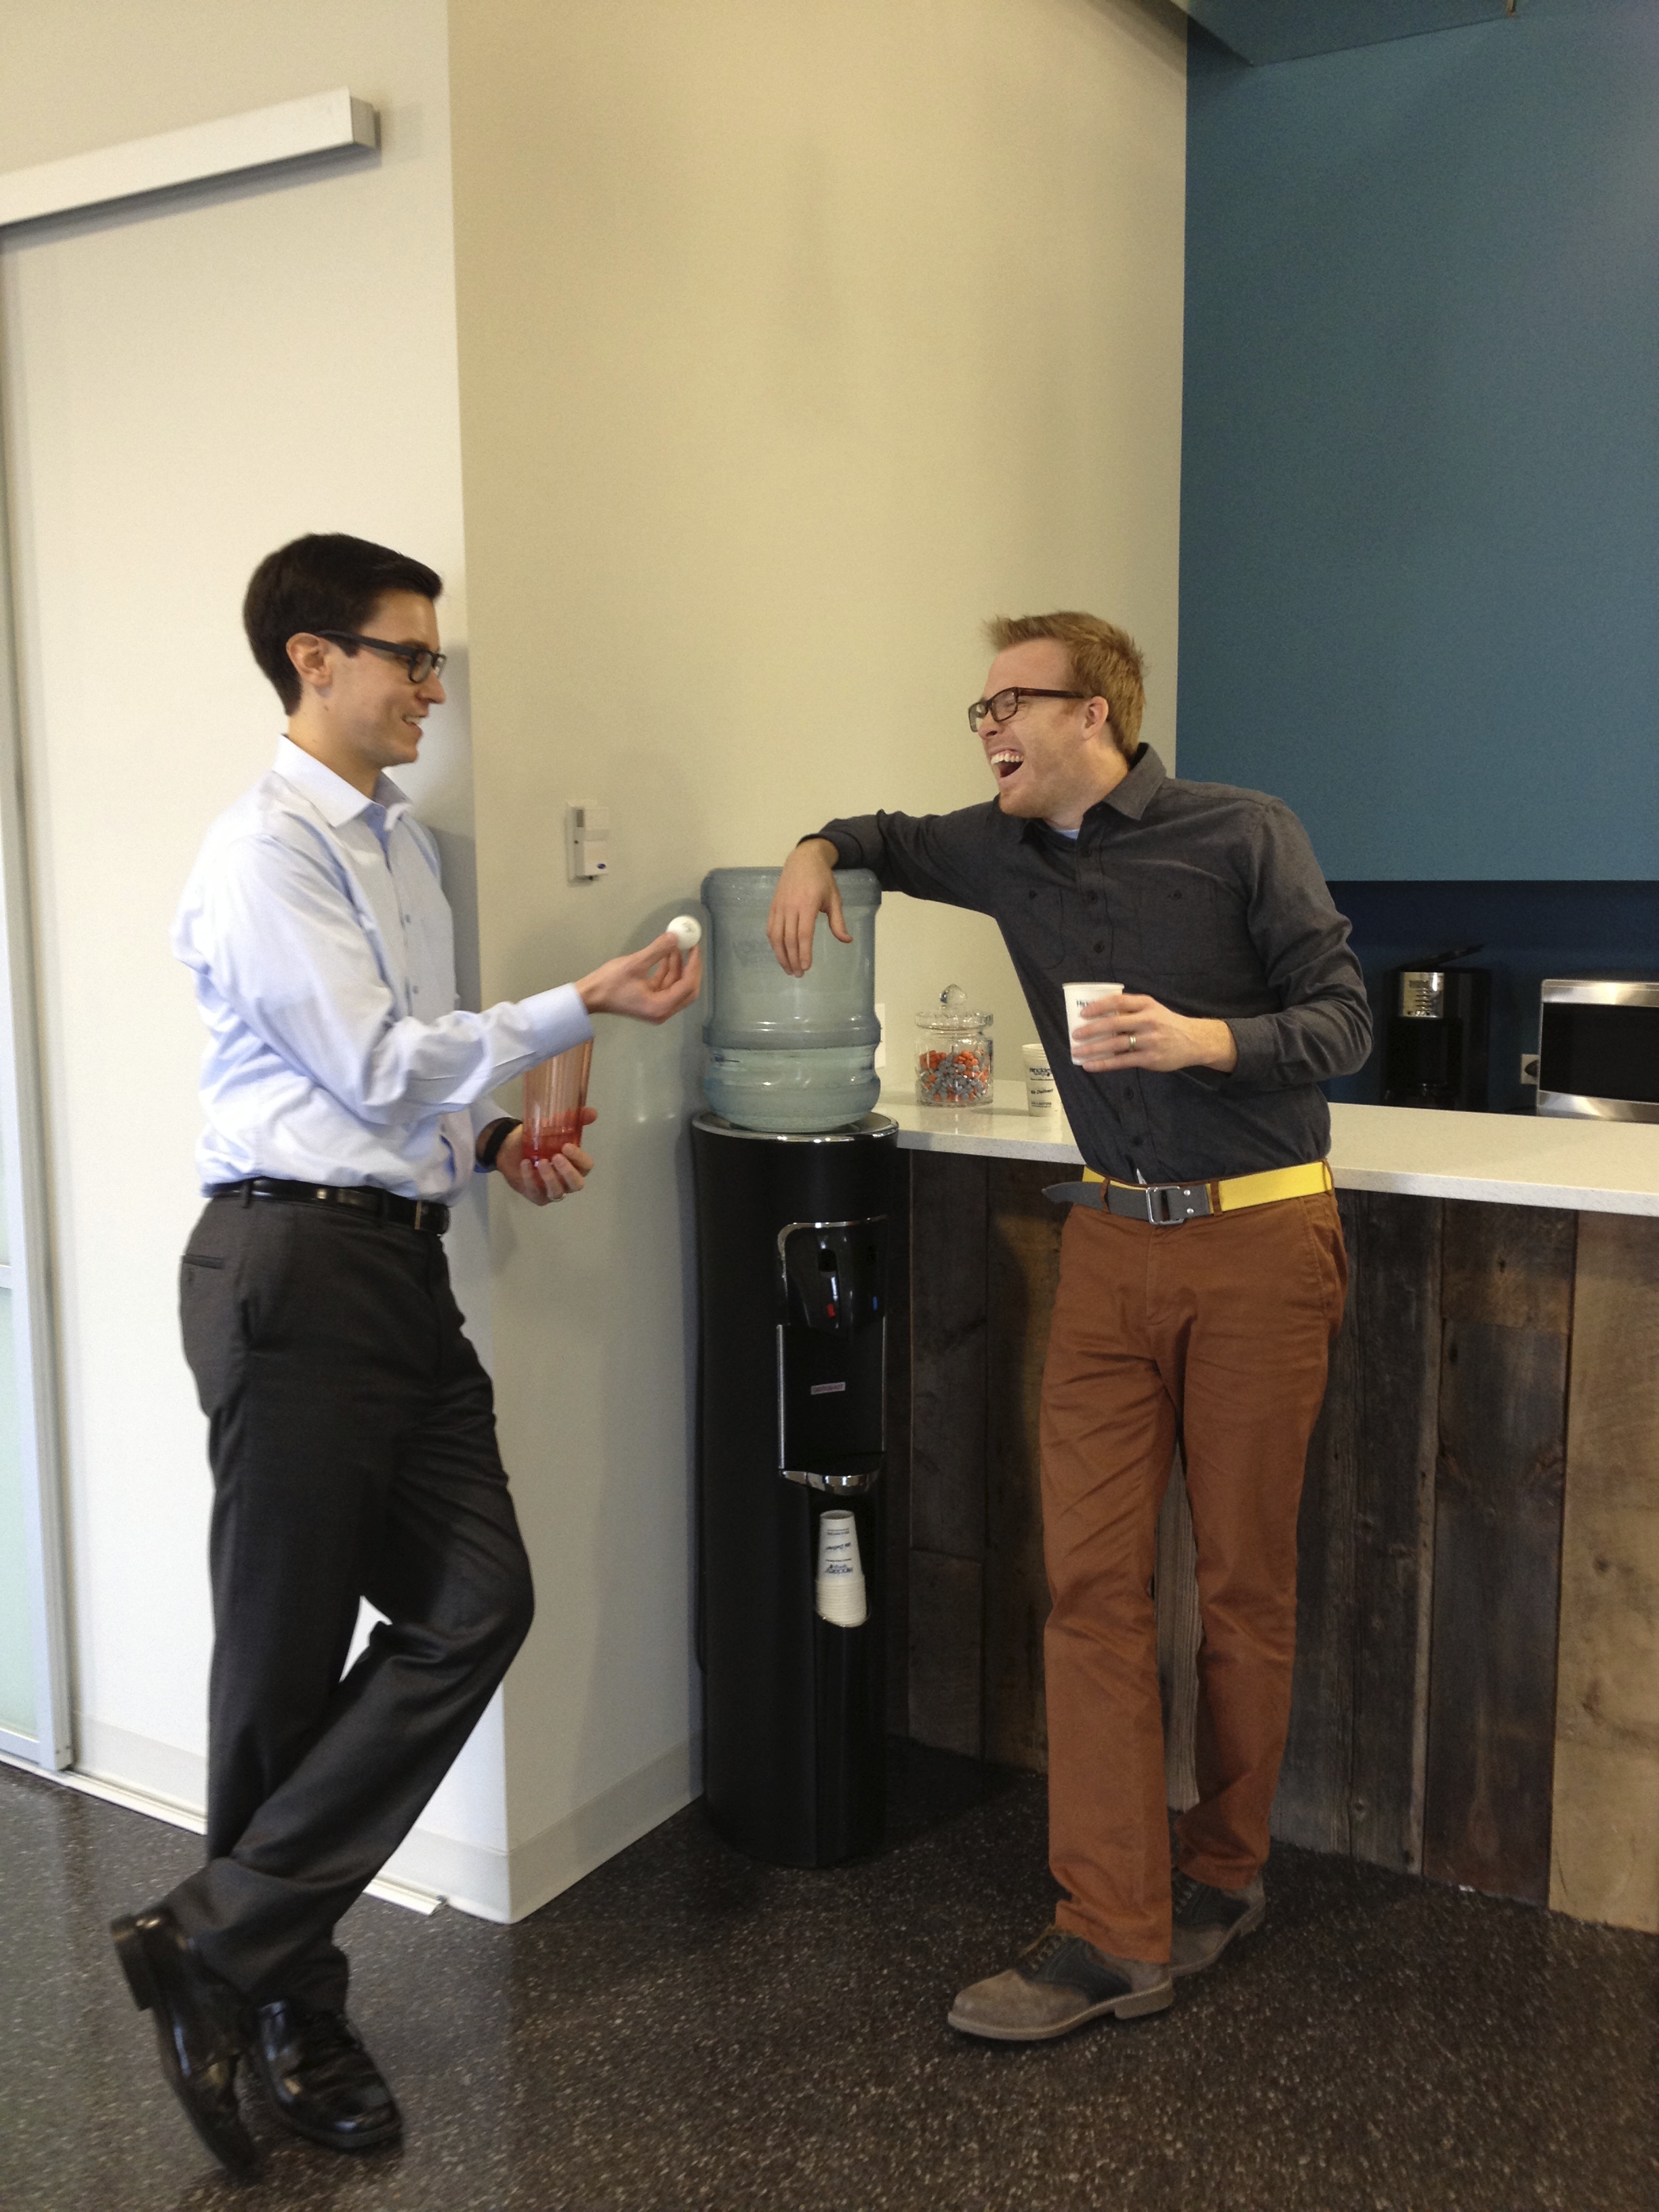 Dave and Tim at water cooler